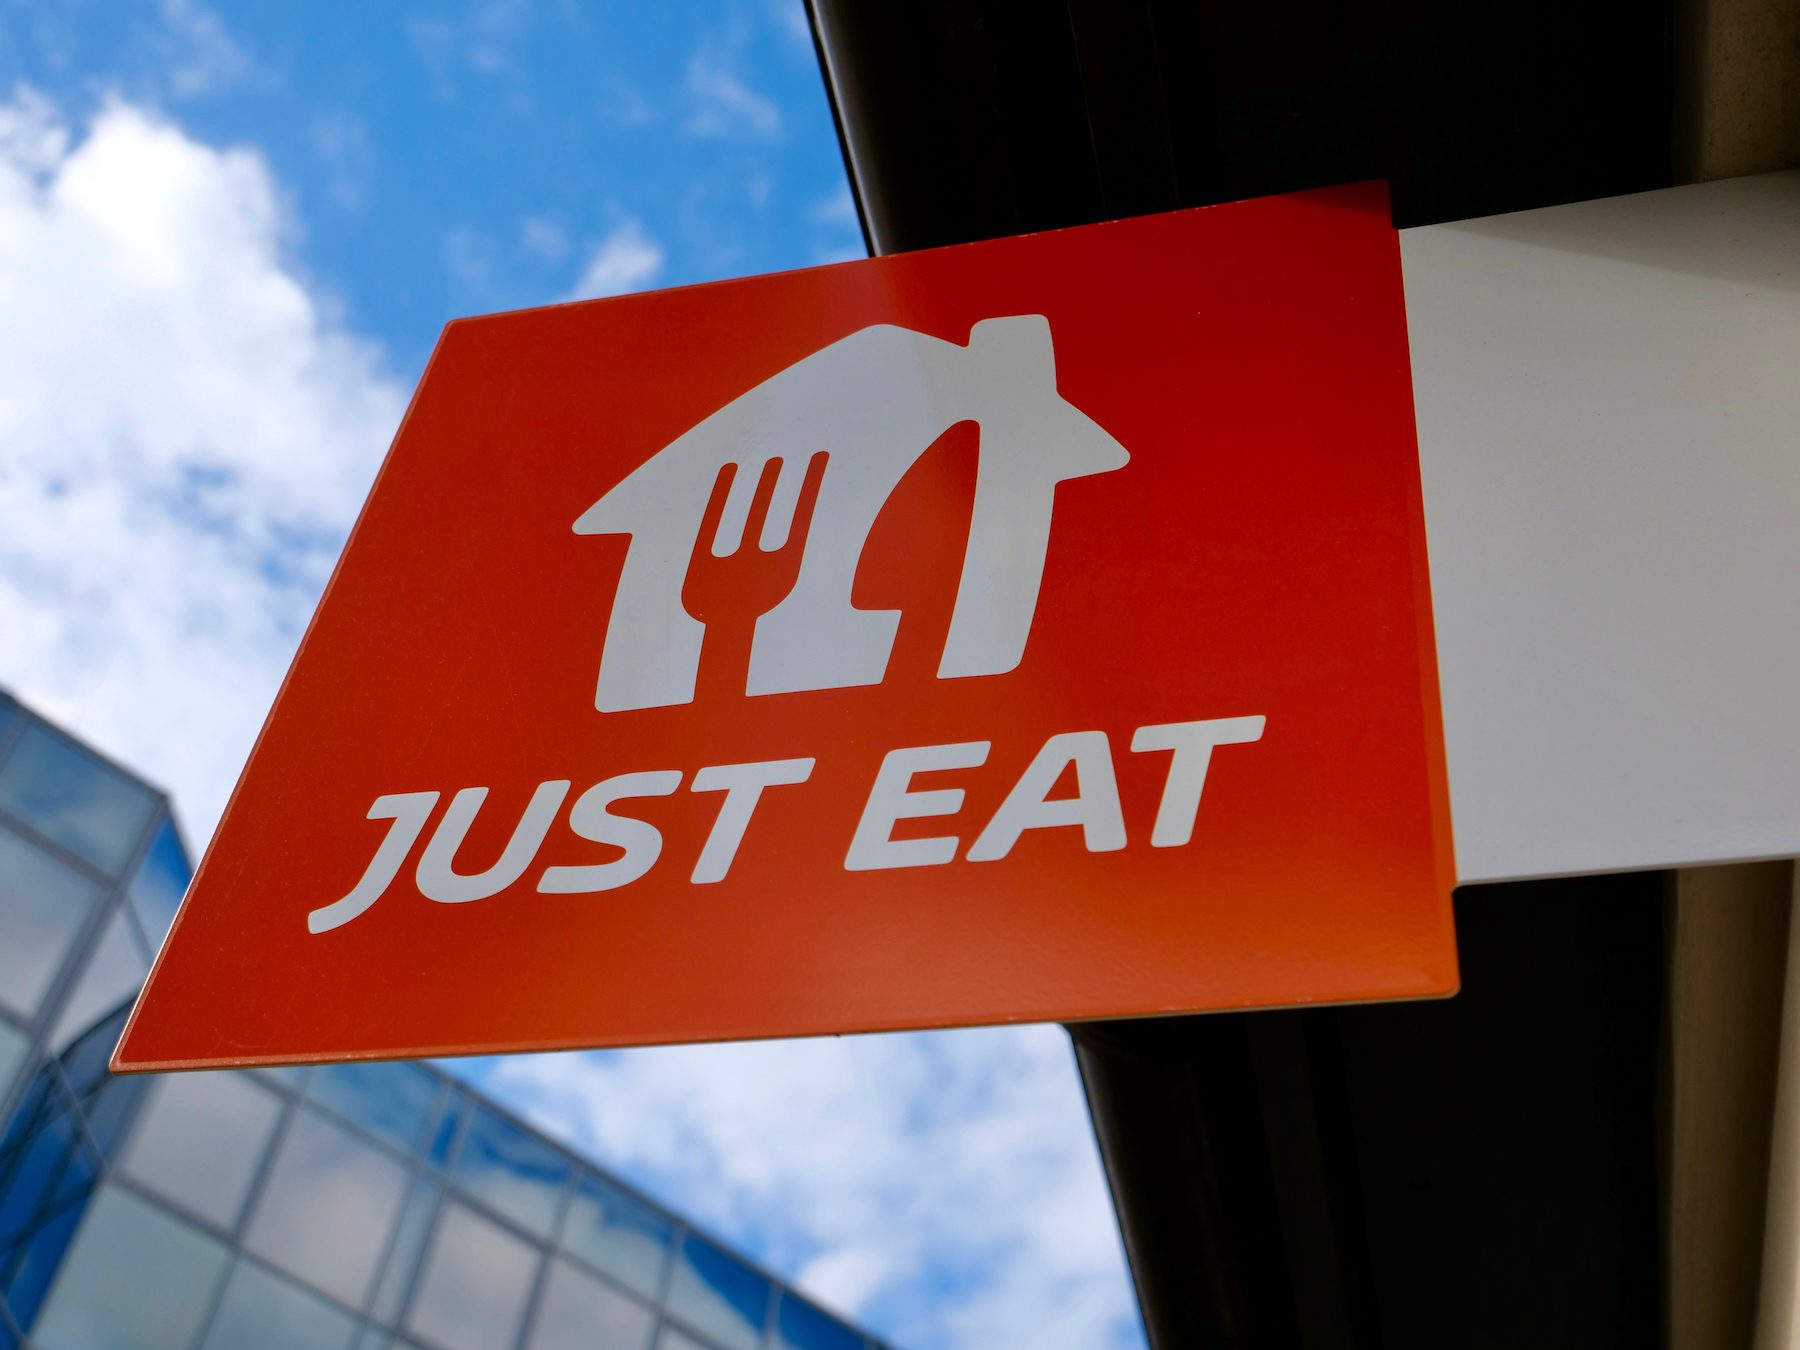 Just Eat cuts almost 2,000 jobs as it returns to gig economy model